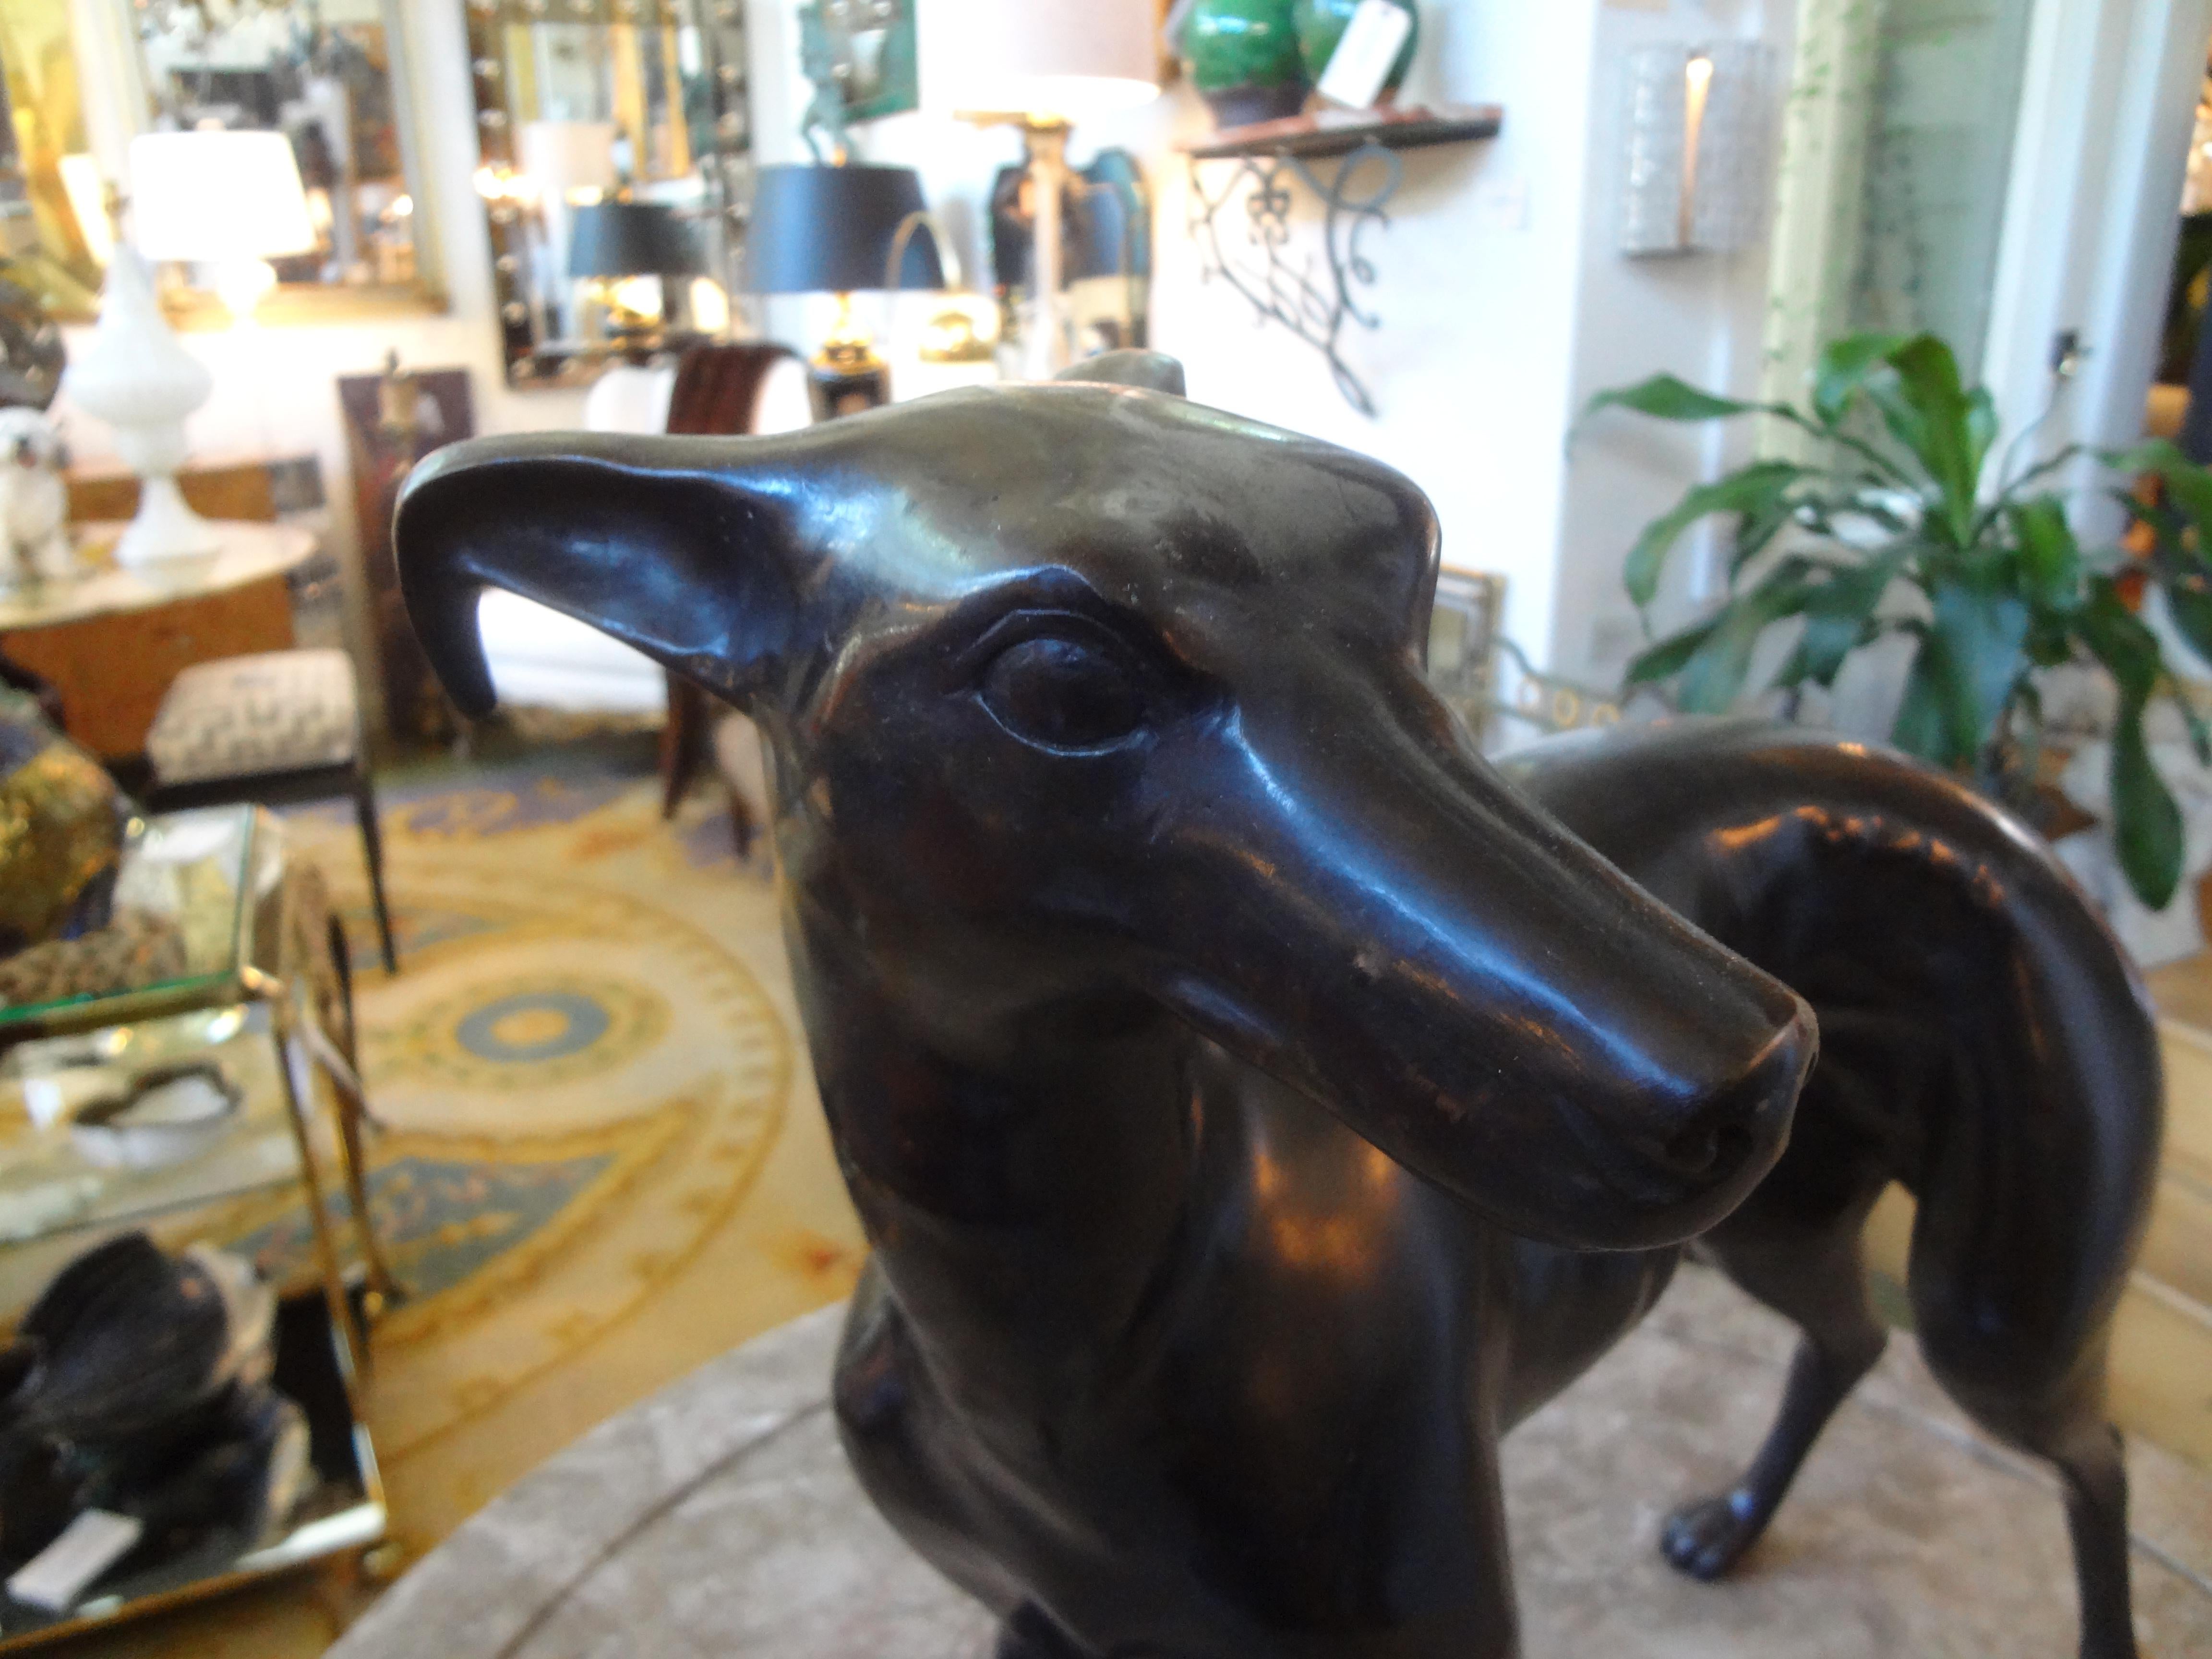 20th century Bronze whippet sculpture.
Beautifully executed Hollywood Regency bronze whippet or greyhound statue or figure from the Mid-20th Century. This life-sized bronze sculpture is extremely realistic.